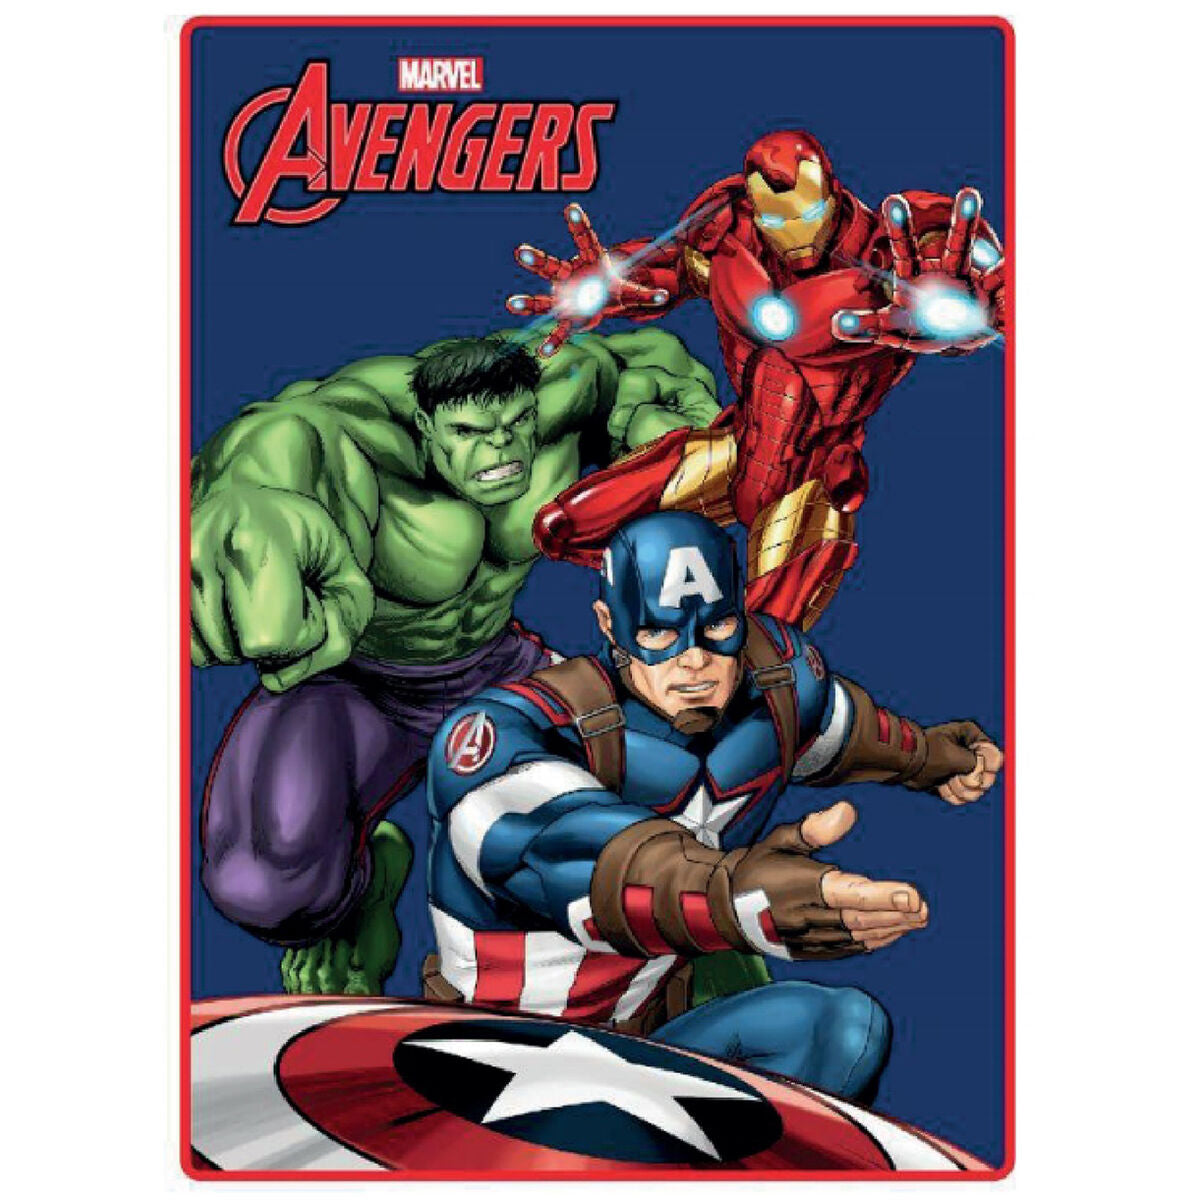 Couverture The Avengers Super heroes 100 x 140 cm Multicouleur Polyester